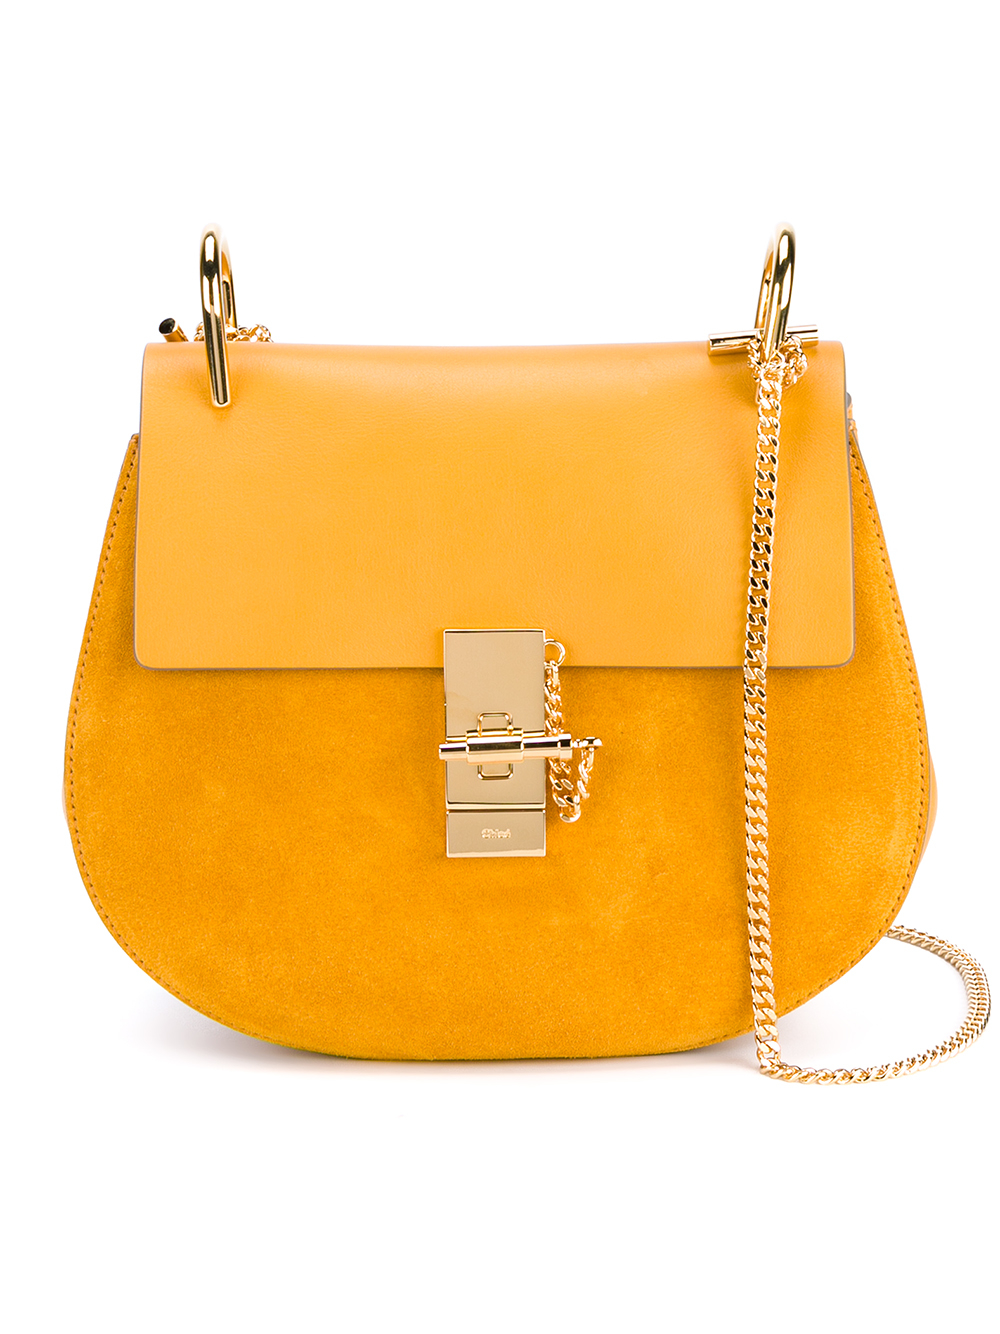 Chlo Drew Small Leather Bag in Yellow | Lyst